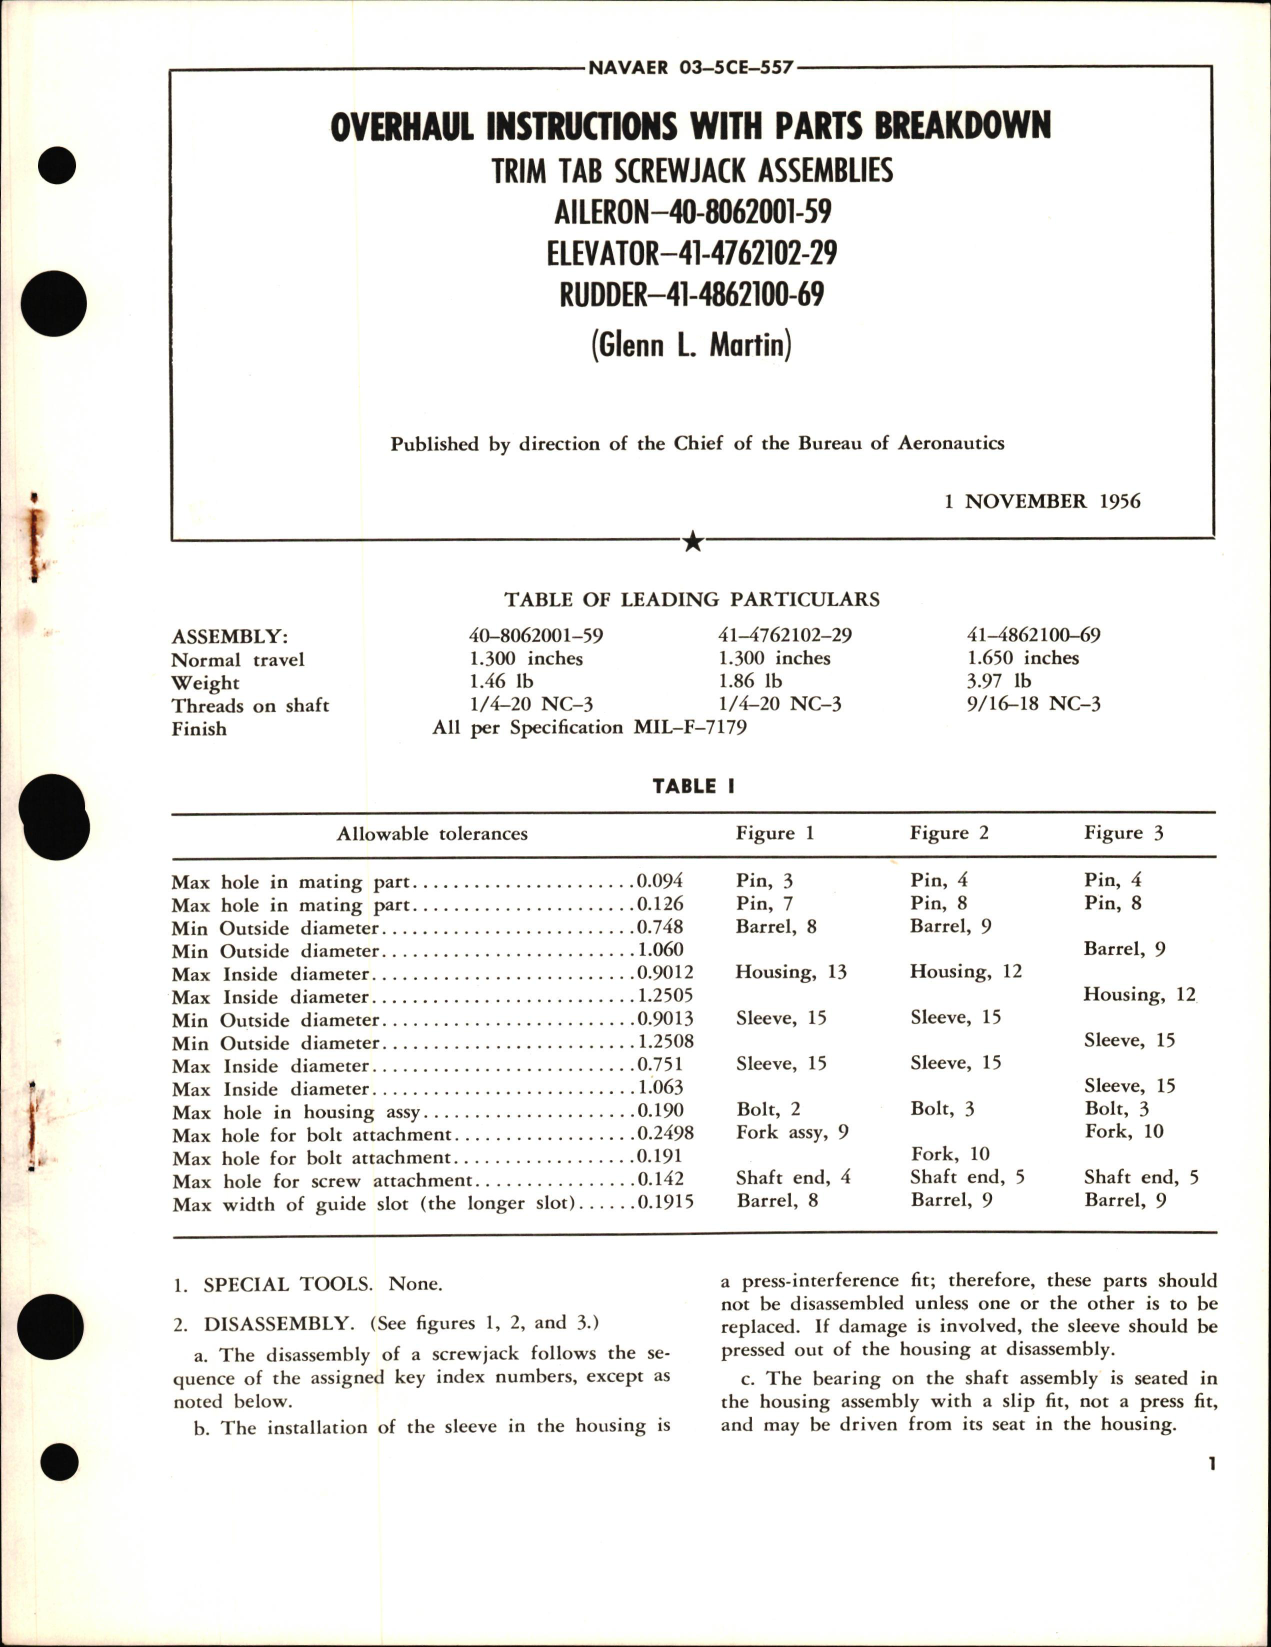 Sample page 1 from AirCorps Library document: Overhaul Instructions with Parts Breakdown for Trim Tab Screwjack Assemblies